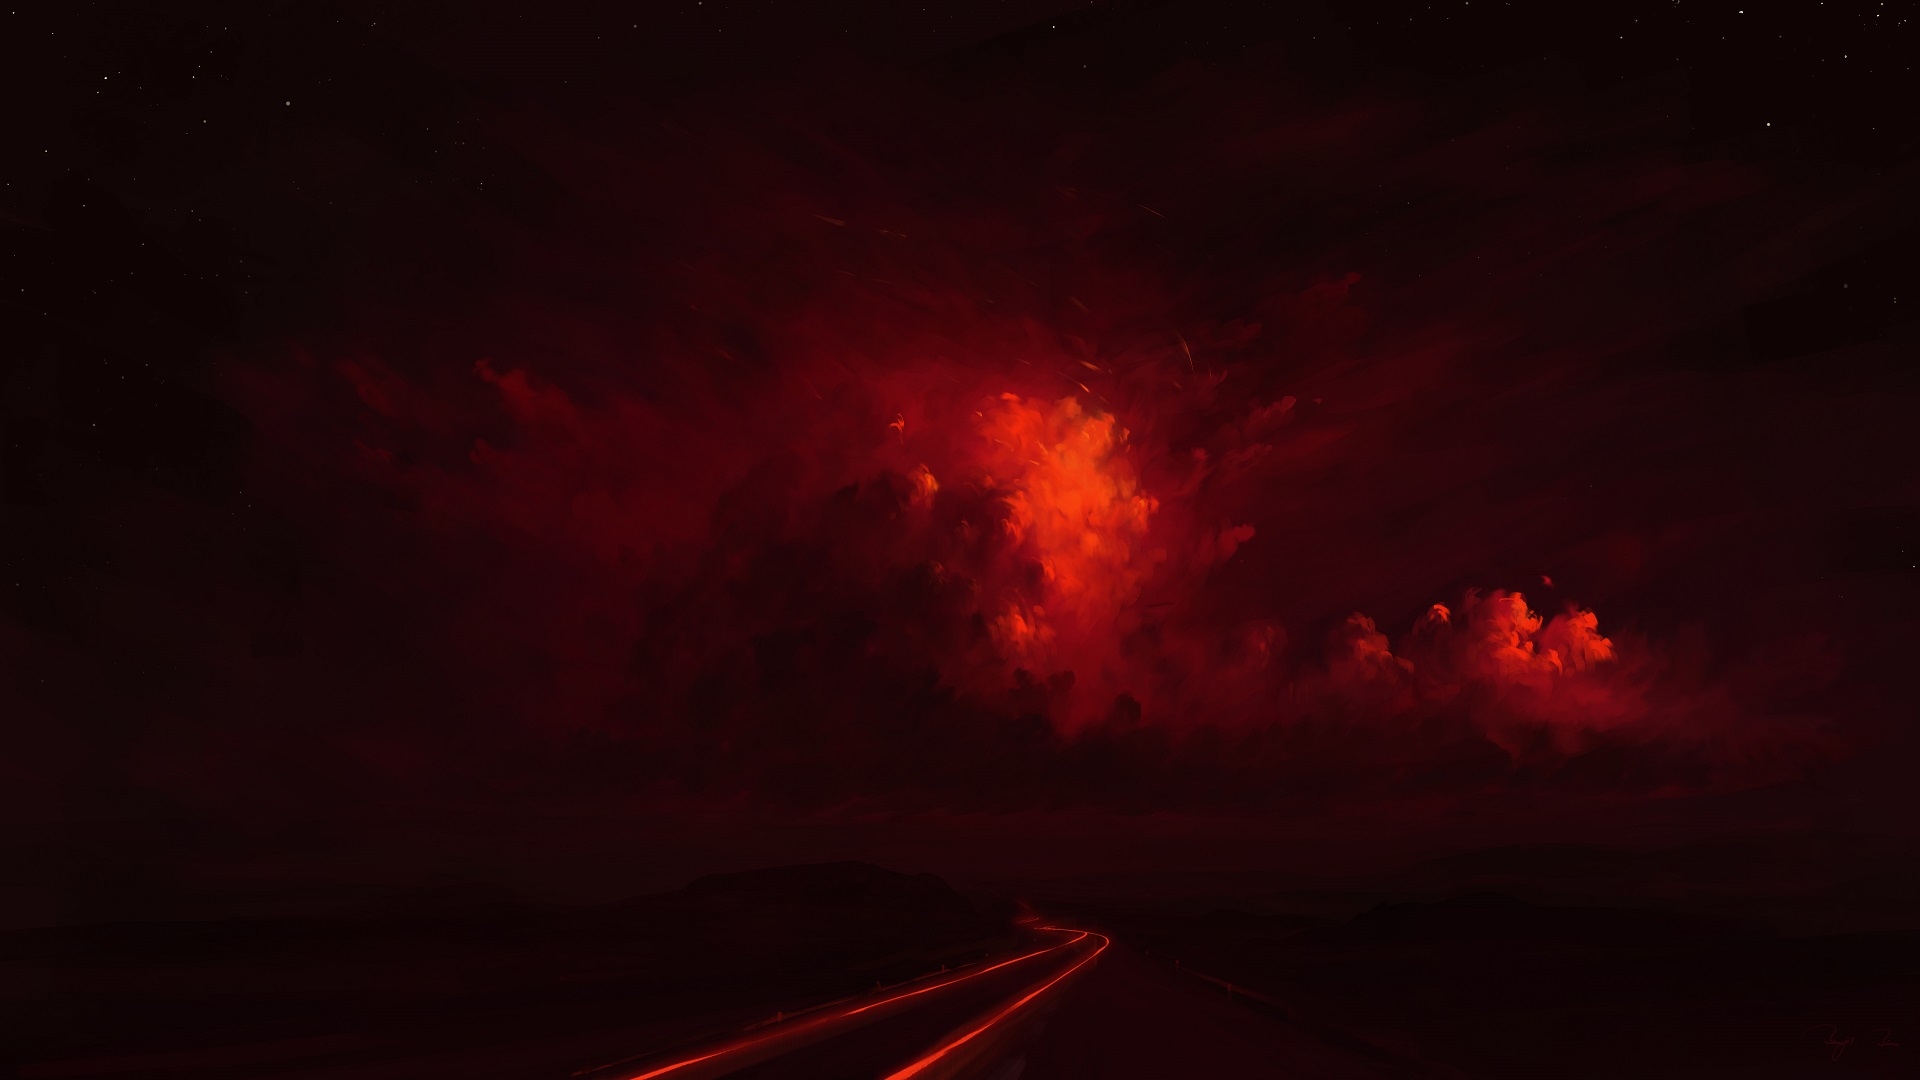 A red and black photo of a road with red lights going down it and red clouds in the sky. - Crimson